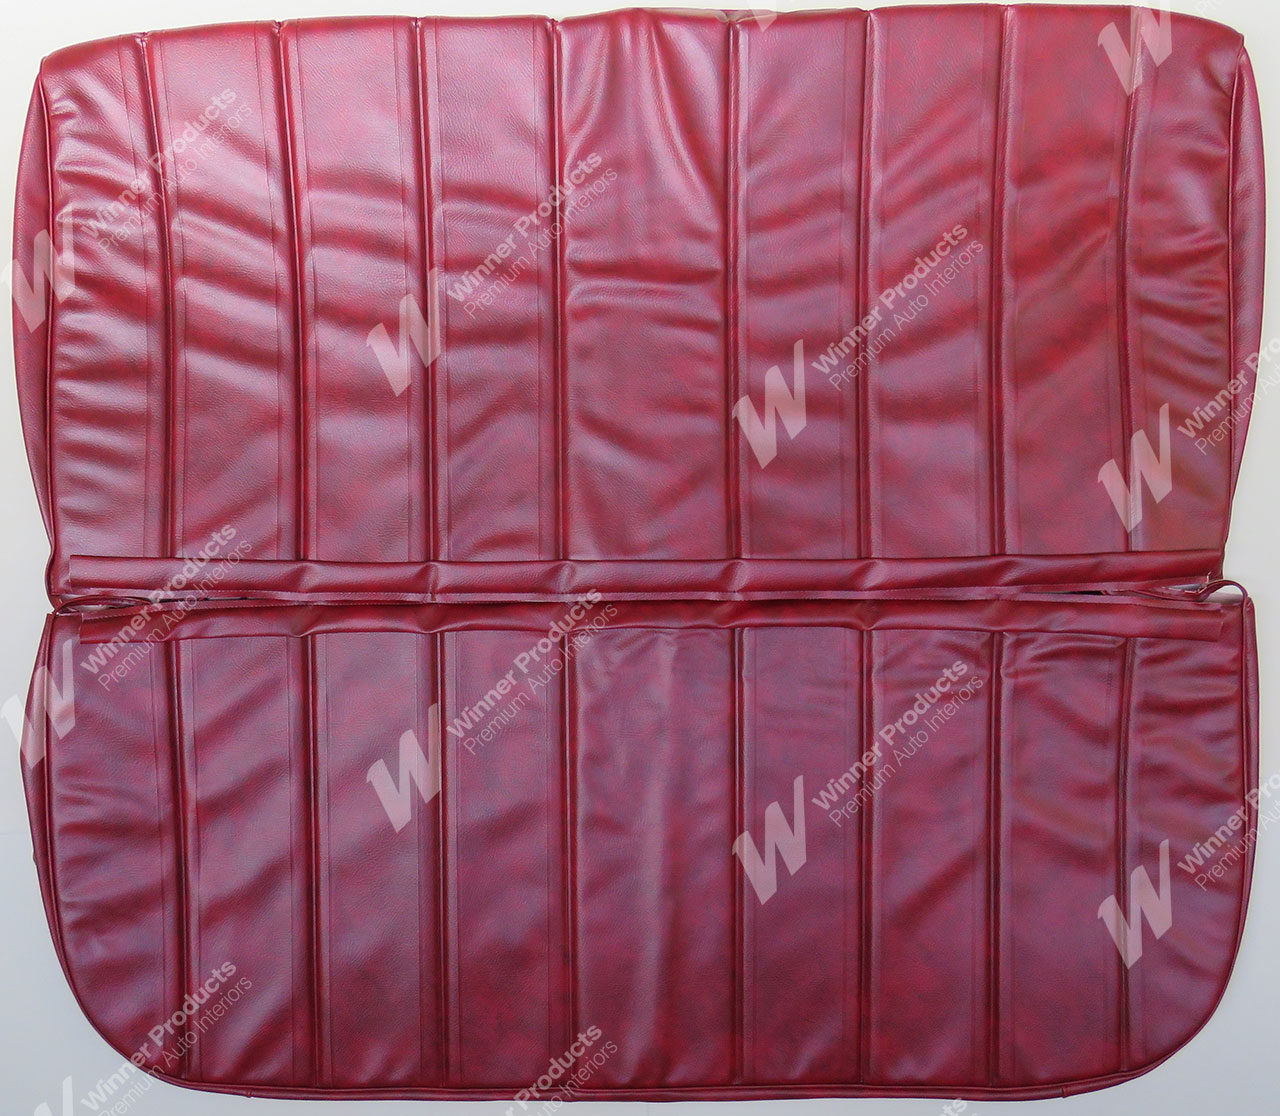 Holden Kingswood HG Kingswood Panel Van 12E Baroque Red Seat Covers (Image 1 of 4)